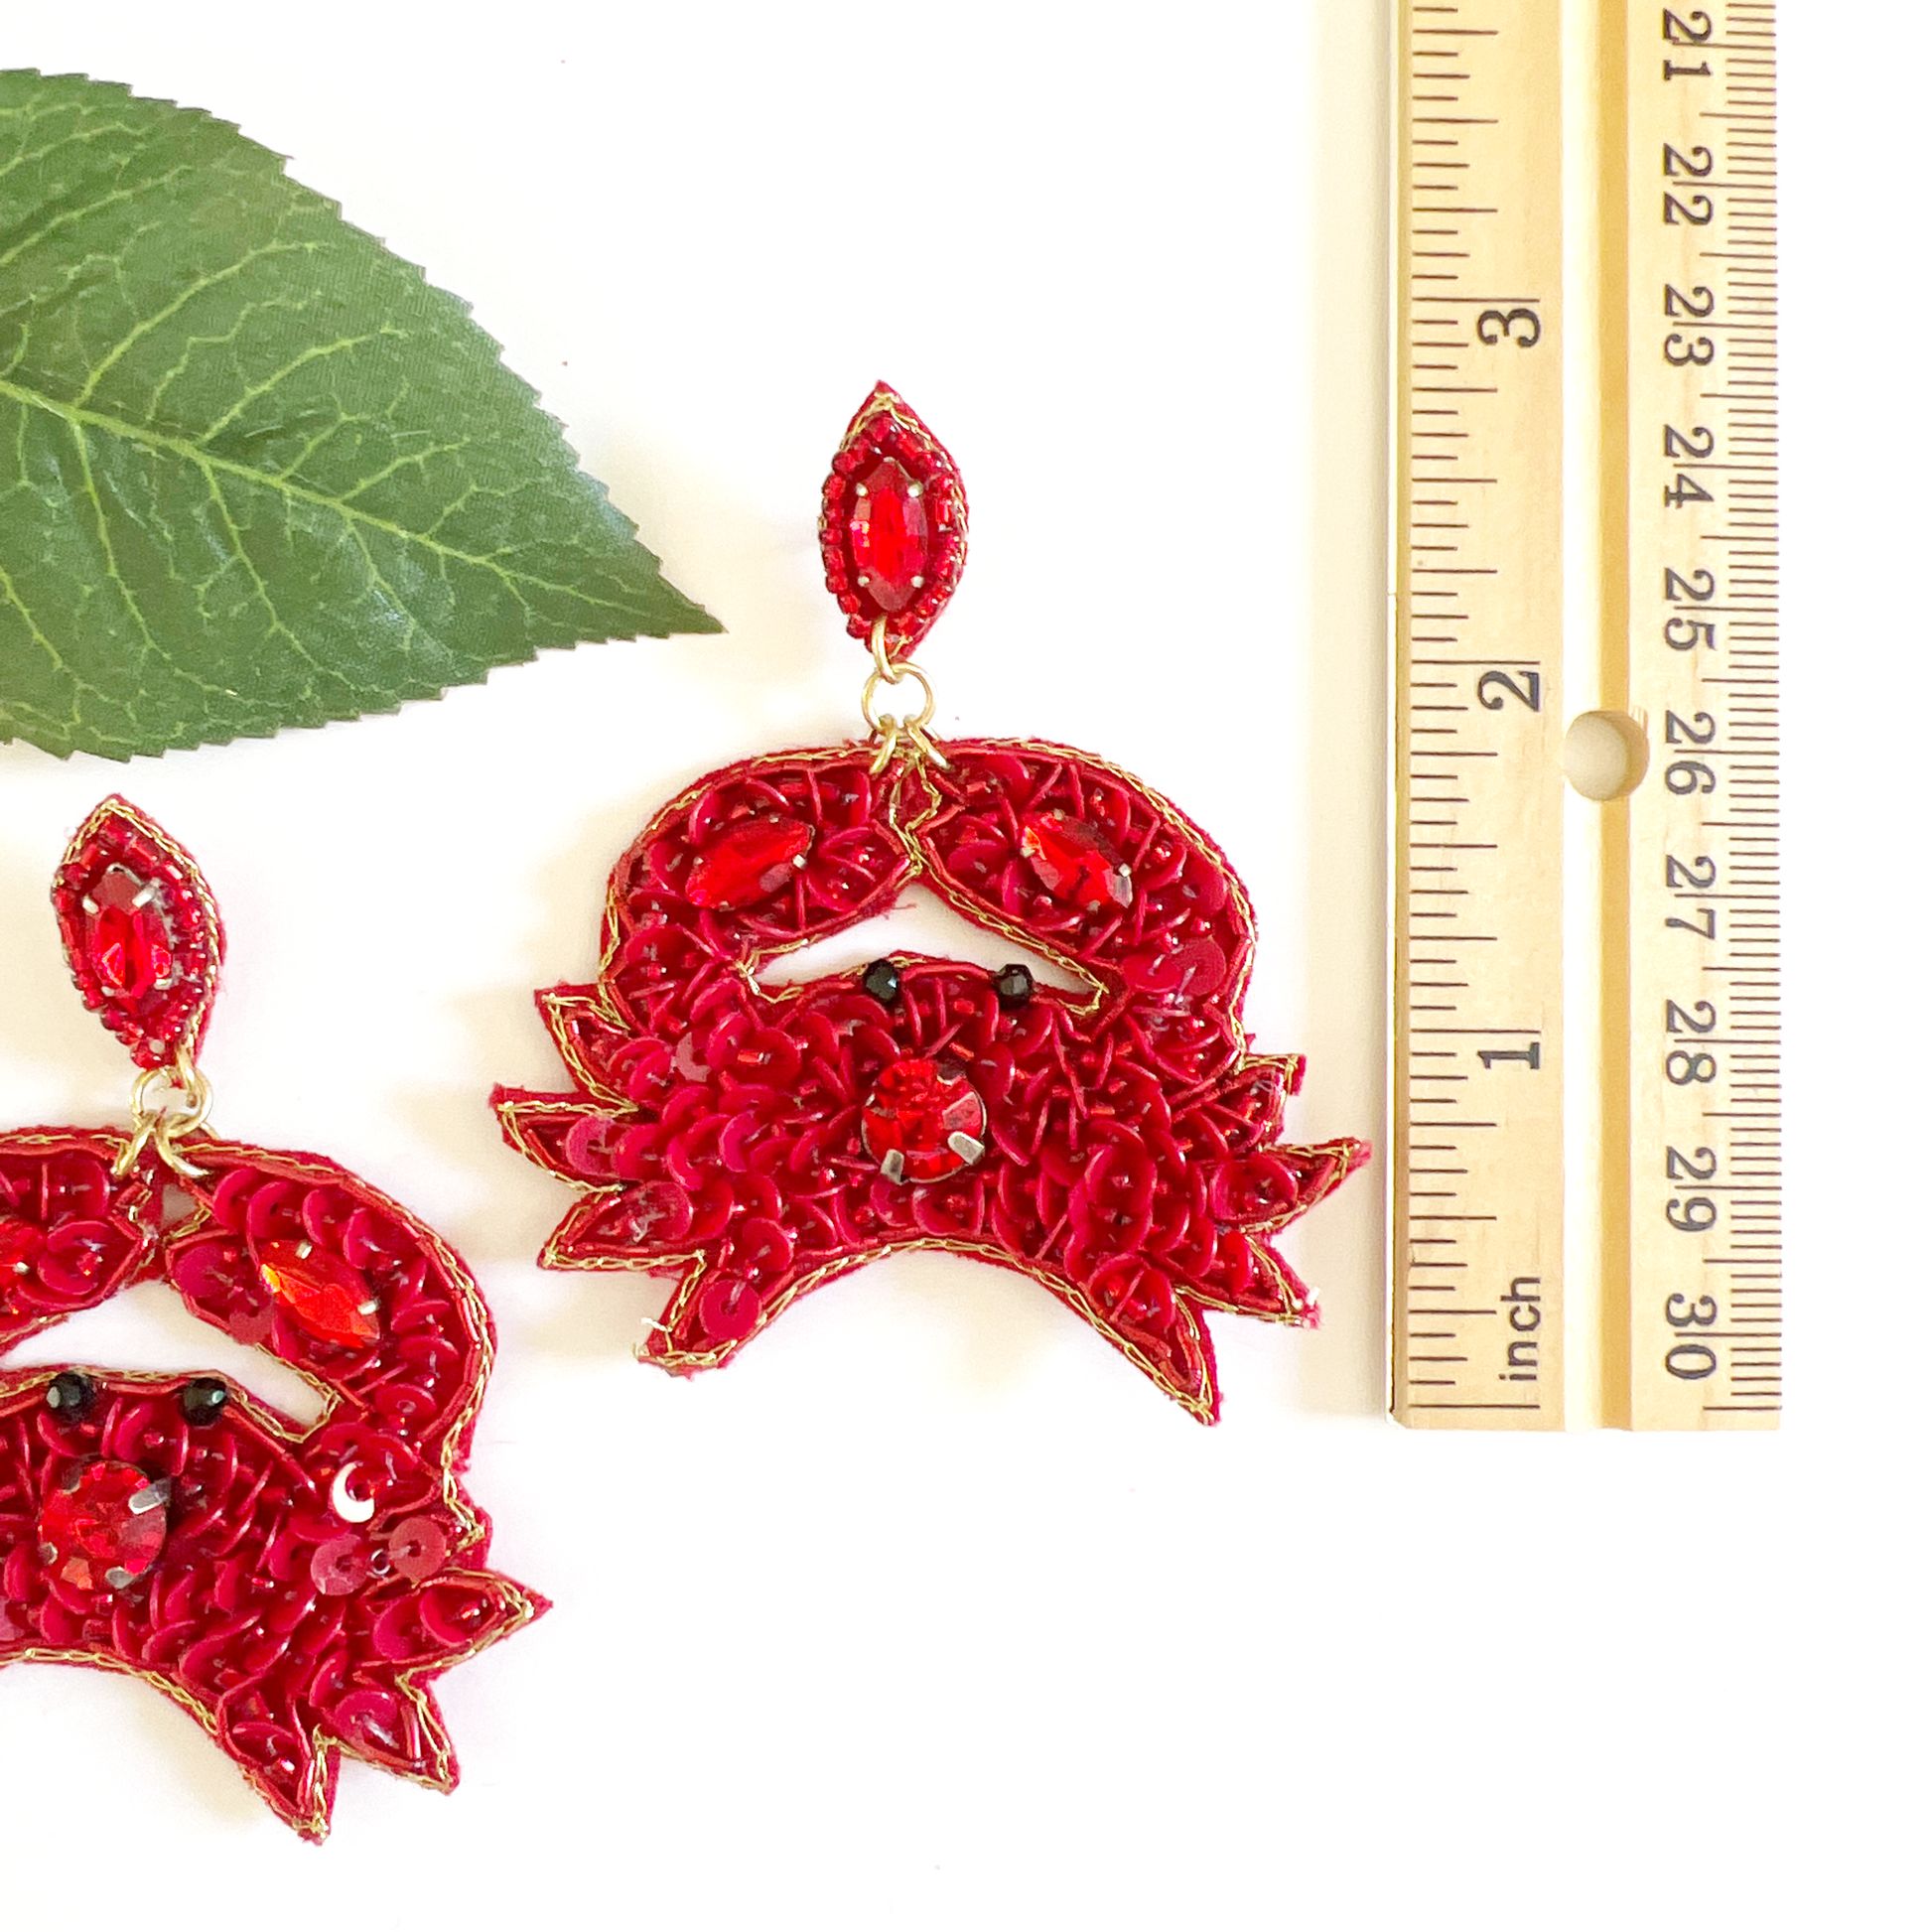 red crab beaded earrings next to ruler showing almost 3 inches in legnth